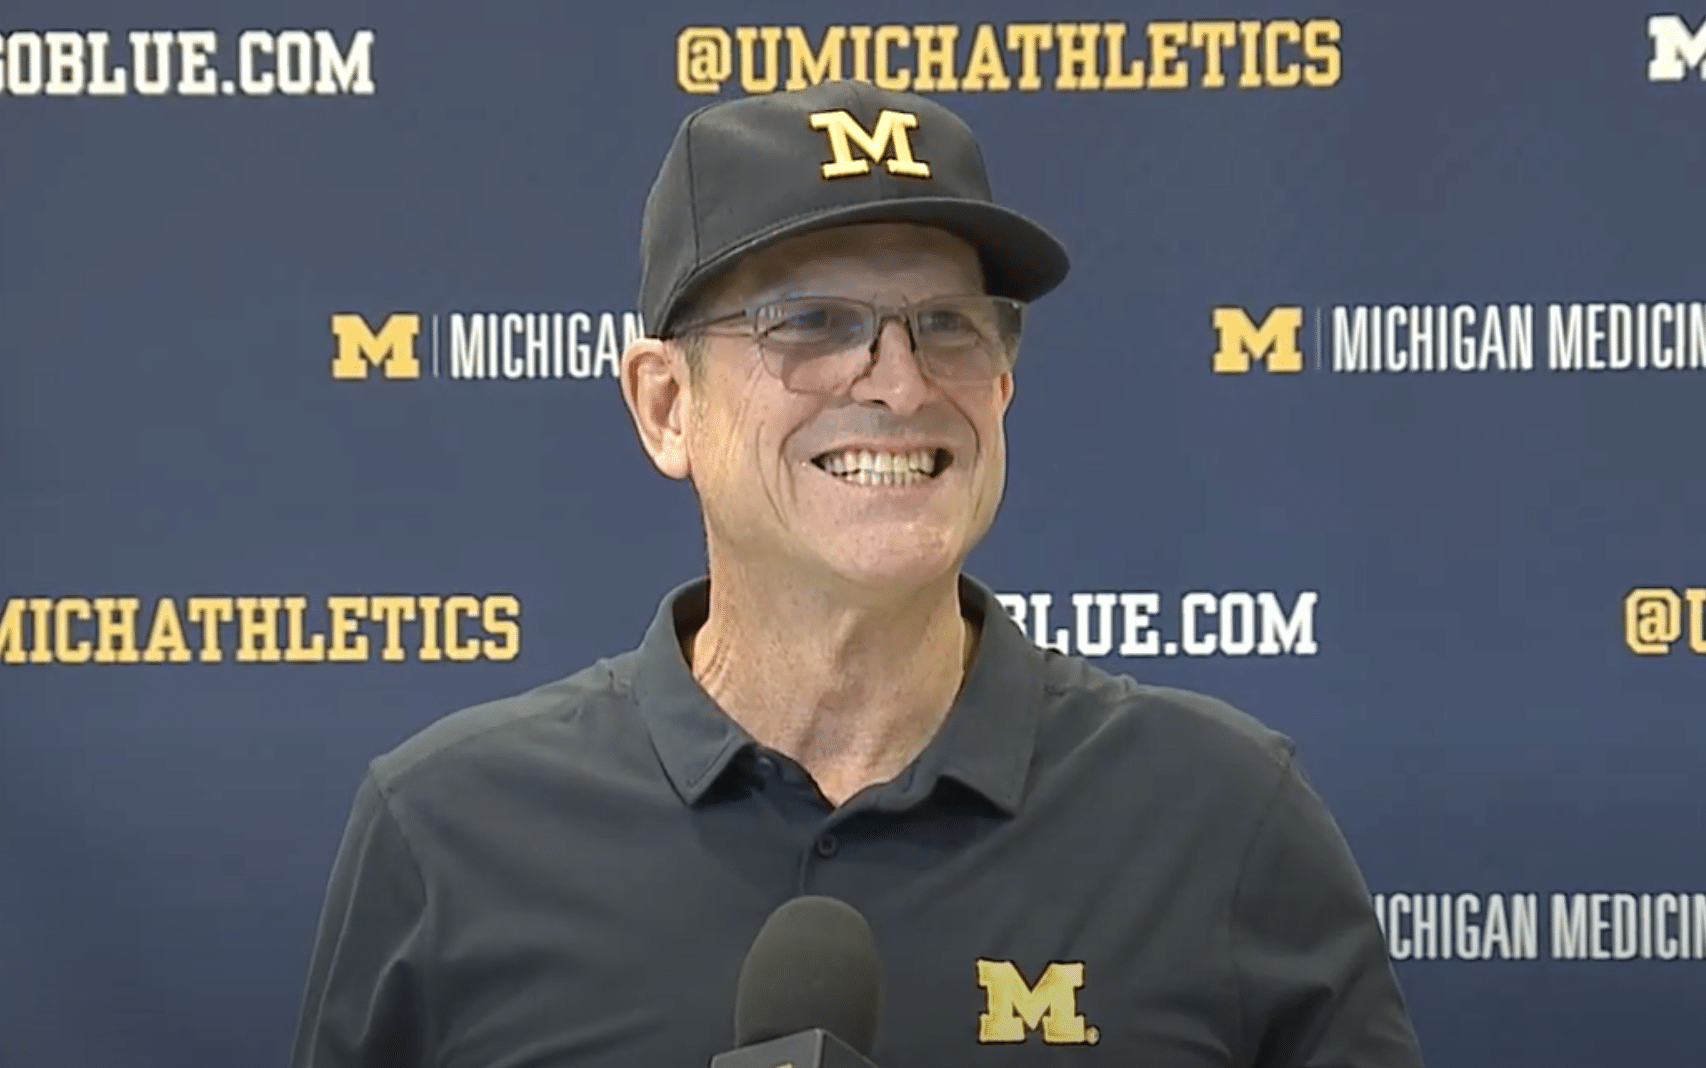 Jim Harbaugh explains why Michigan Football Jim Harbaugh compares Michigan locker room Jim Harbaugh praises Sherrone Moore Will Jim Harbaugh receive his bonuses for 2023 Los Angeles Chargers interested in hiring Jim Harbaugh Jim Harbaugh Talks About J.J. McCarthy's Growth at Michigan Jim Harbaugh Has Perfect Answer to Question About His Future Jim Harbaugh responds to question